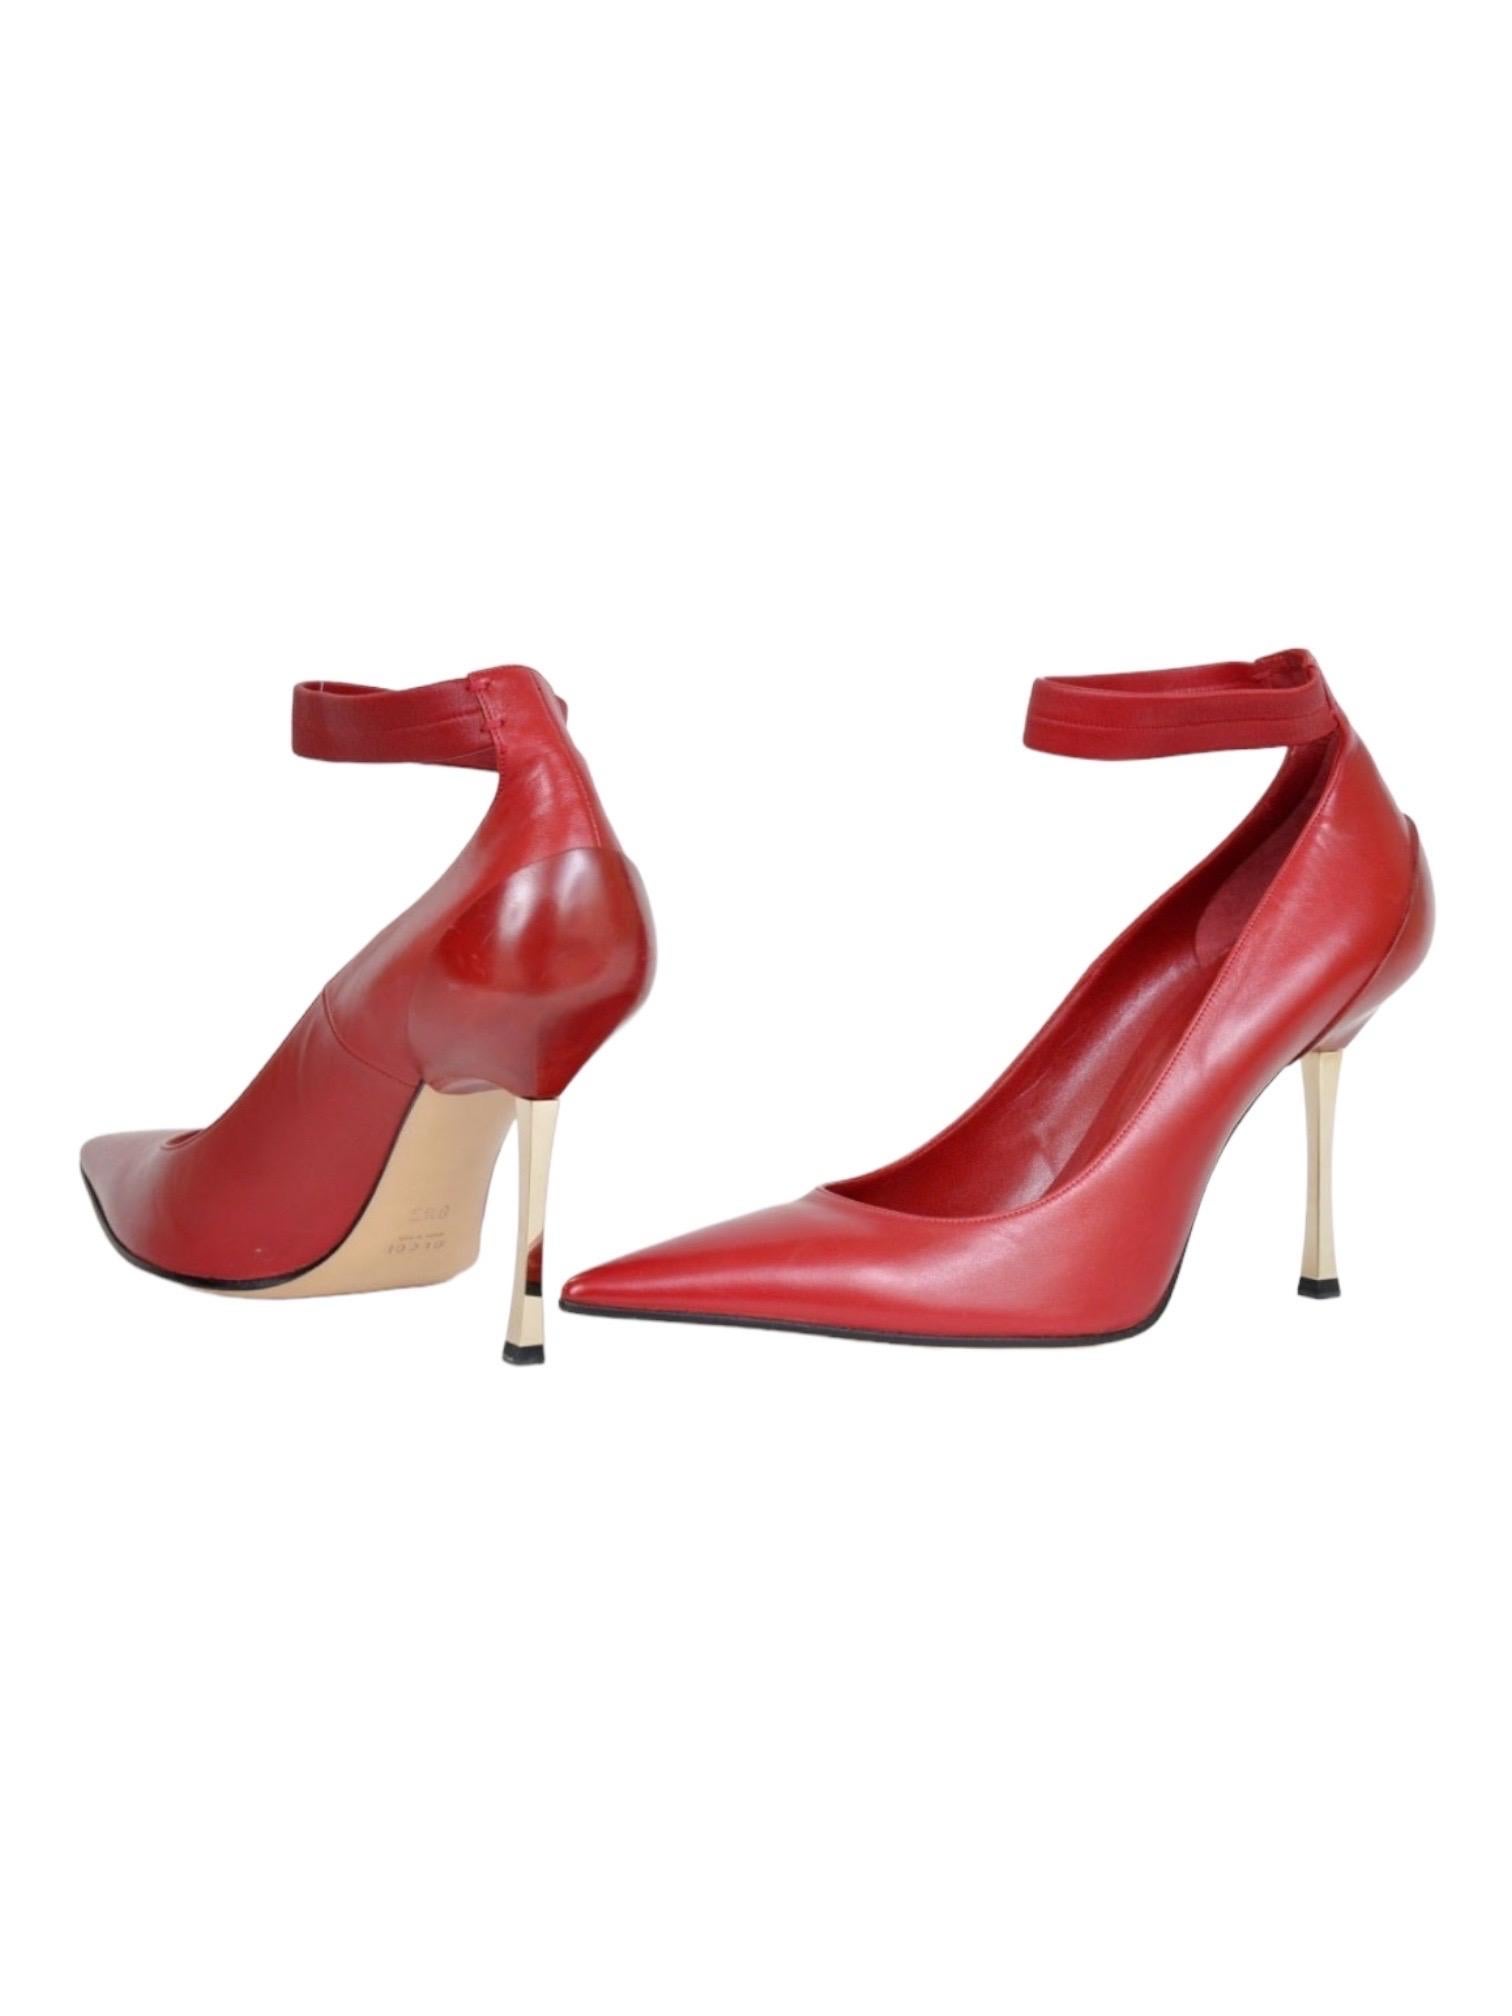 tom ford red heels